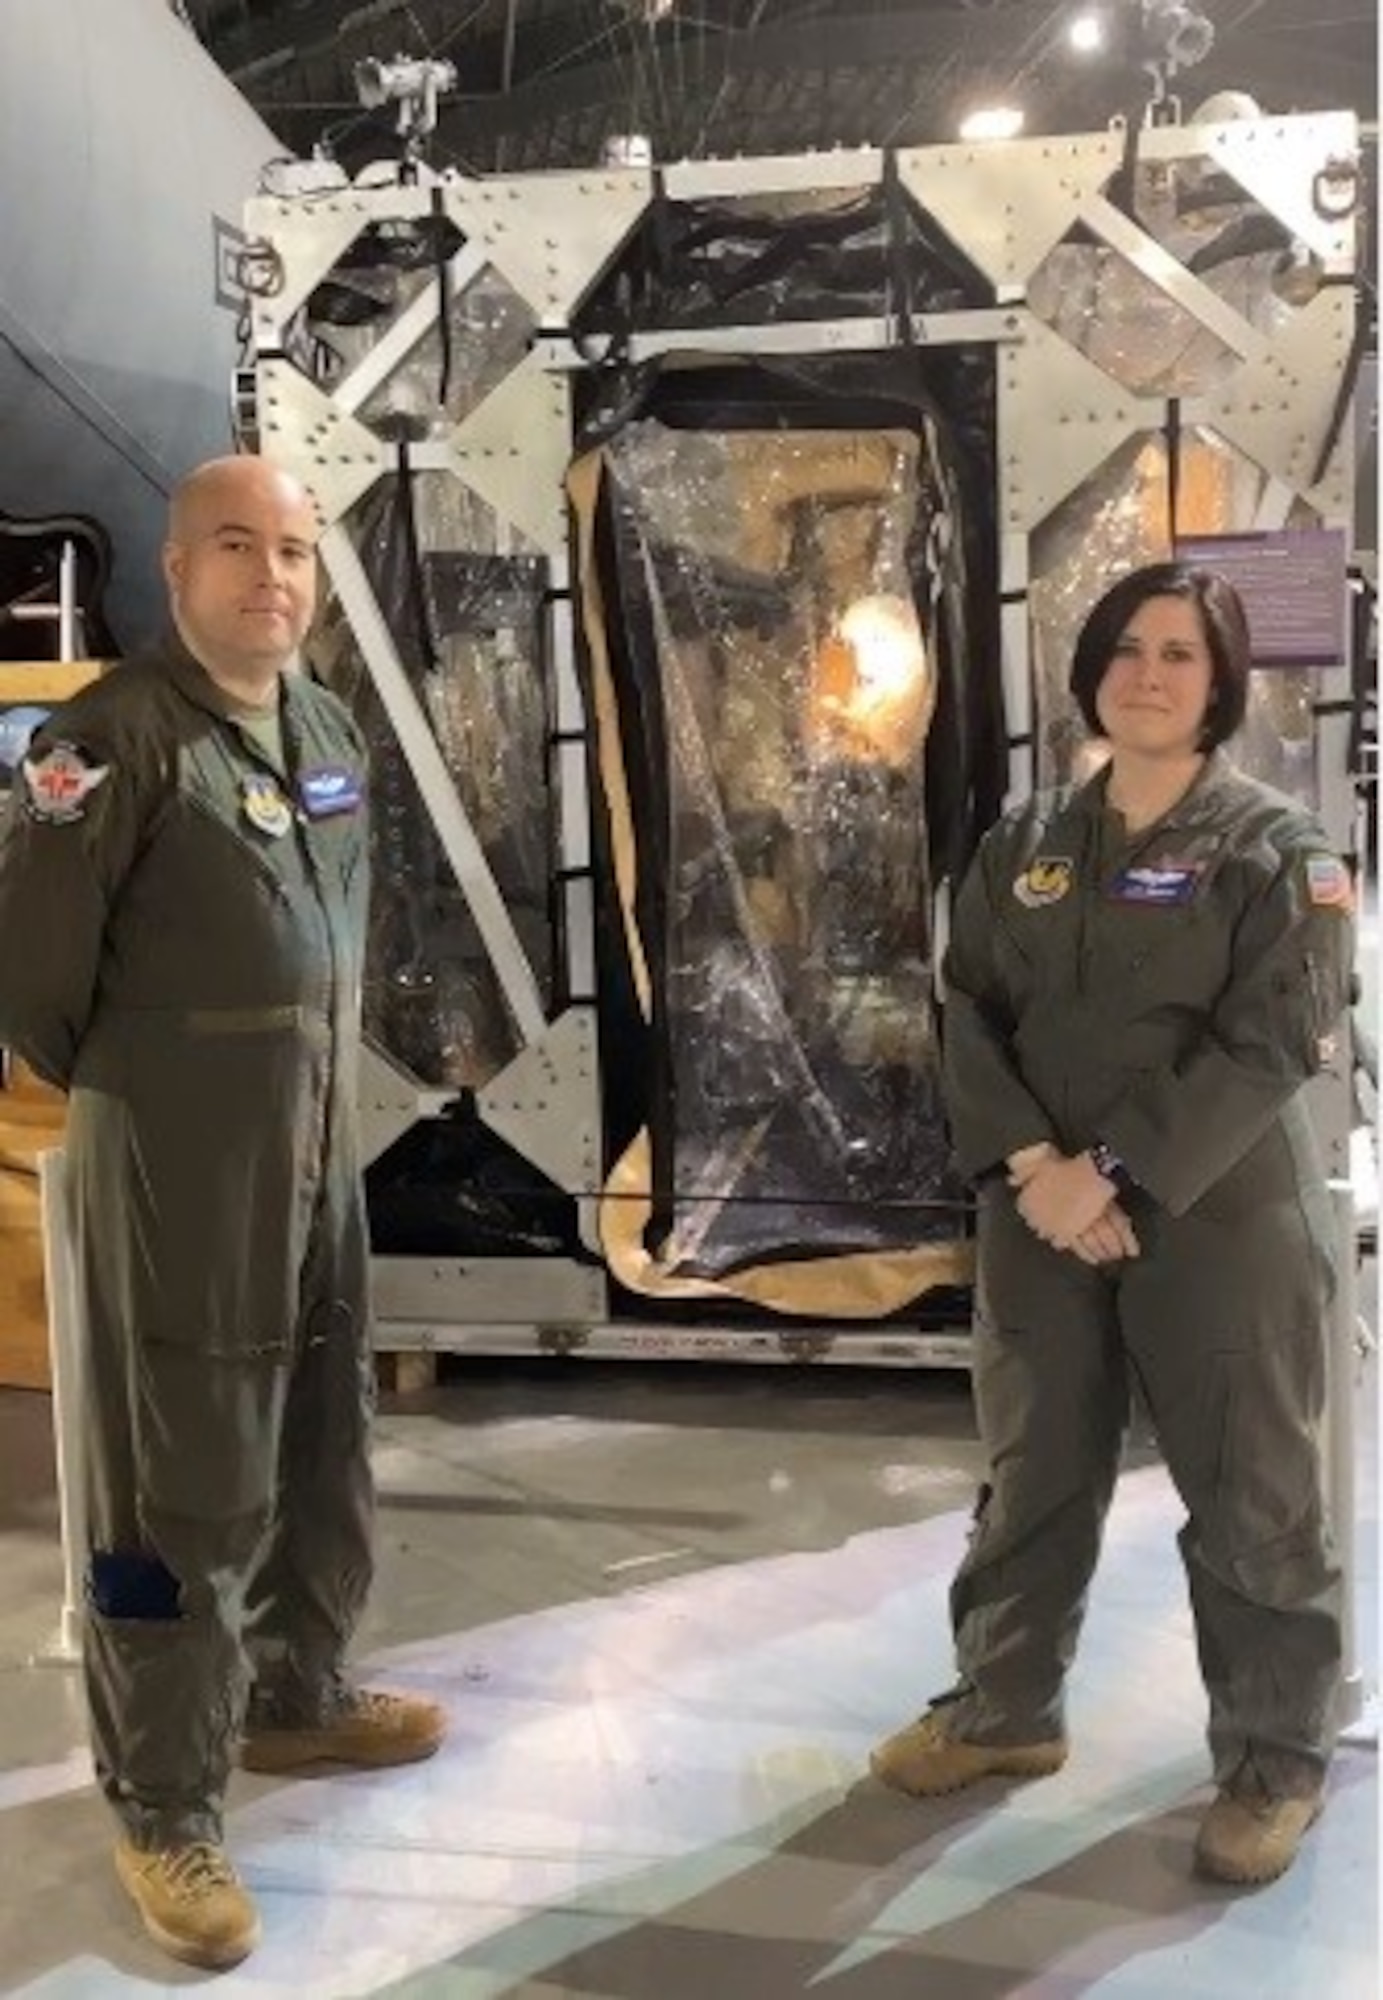 Tech. Sgt. Robert Van Aken and Capt. Alicia Houston, both instructors at the U.S. Air Force School of Aerospace Medicine, stand in front of the Transport Isolation System (TIS) during the grand opening celebration of the National Museum of the U.S. Air Force’s newest permanent exhibit, “A Force for Good: Department of the Air Force Humanitarian Missions,” April 9. (U.S. Air Force photo / Michele Miller)